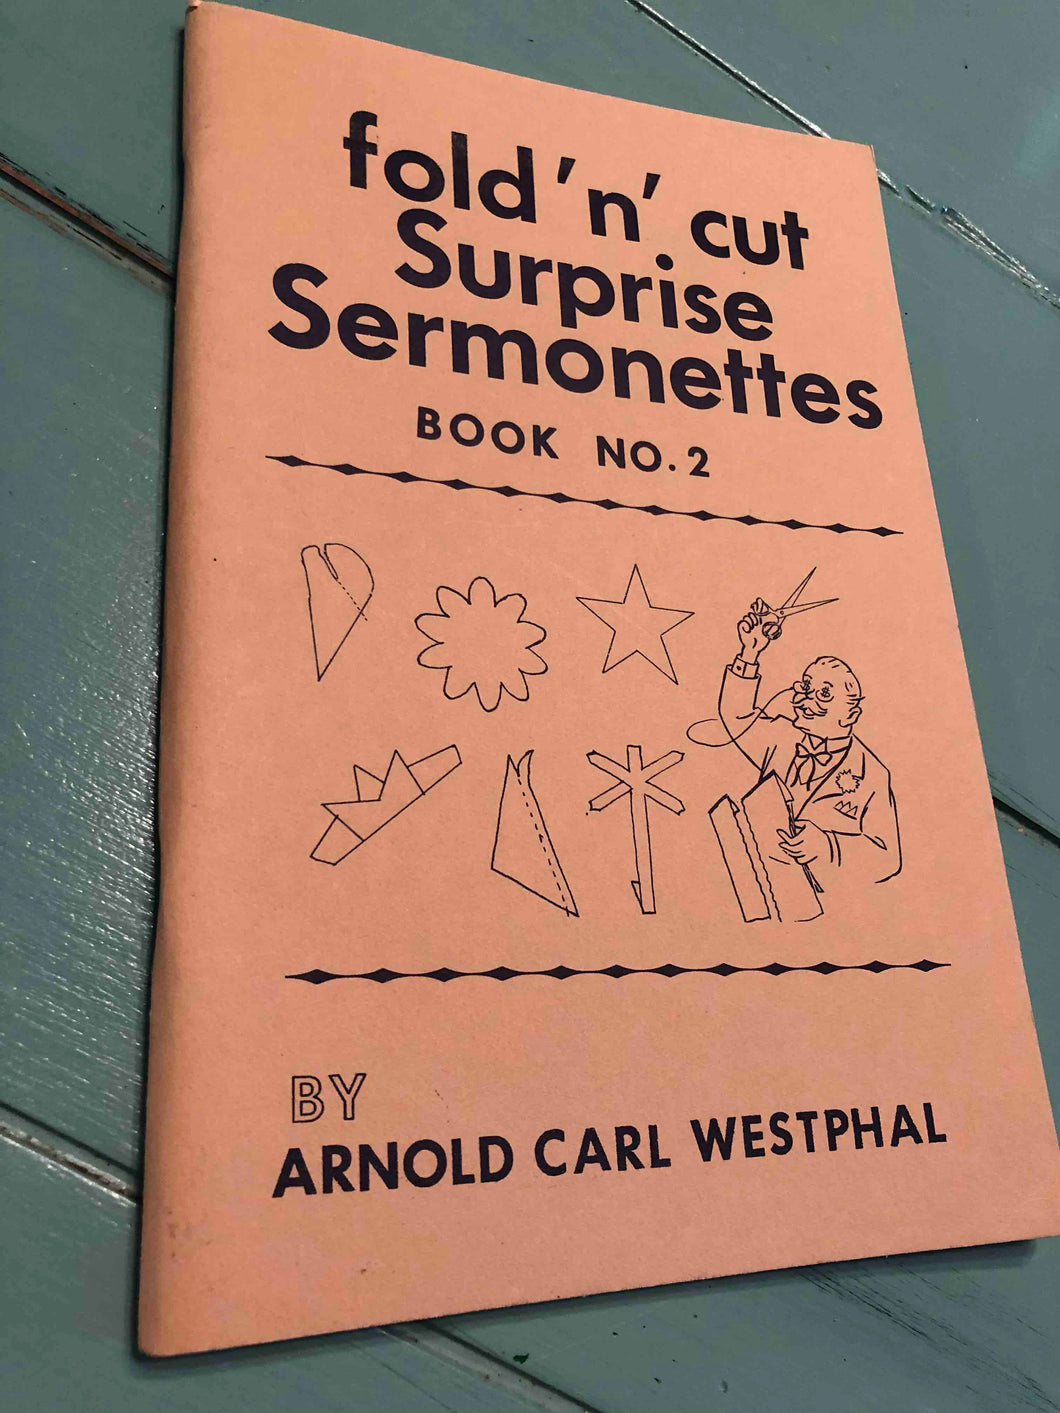 Copy of Fold 'N' Cut Surprise Sermonettes Book No. 2 by Arnold Carl Westphal